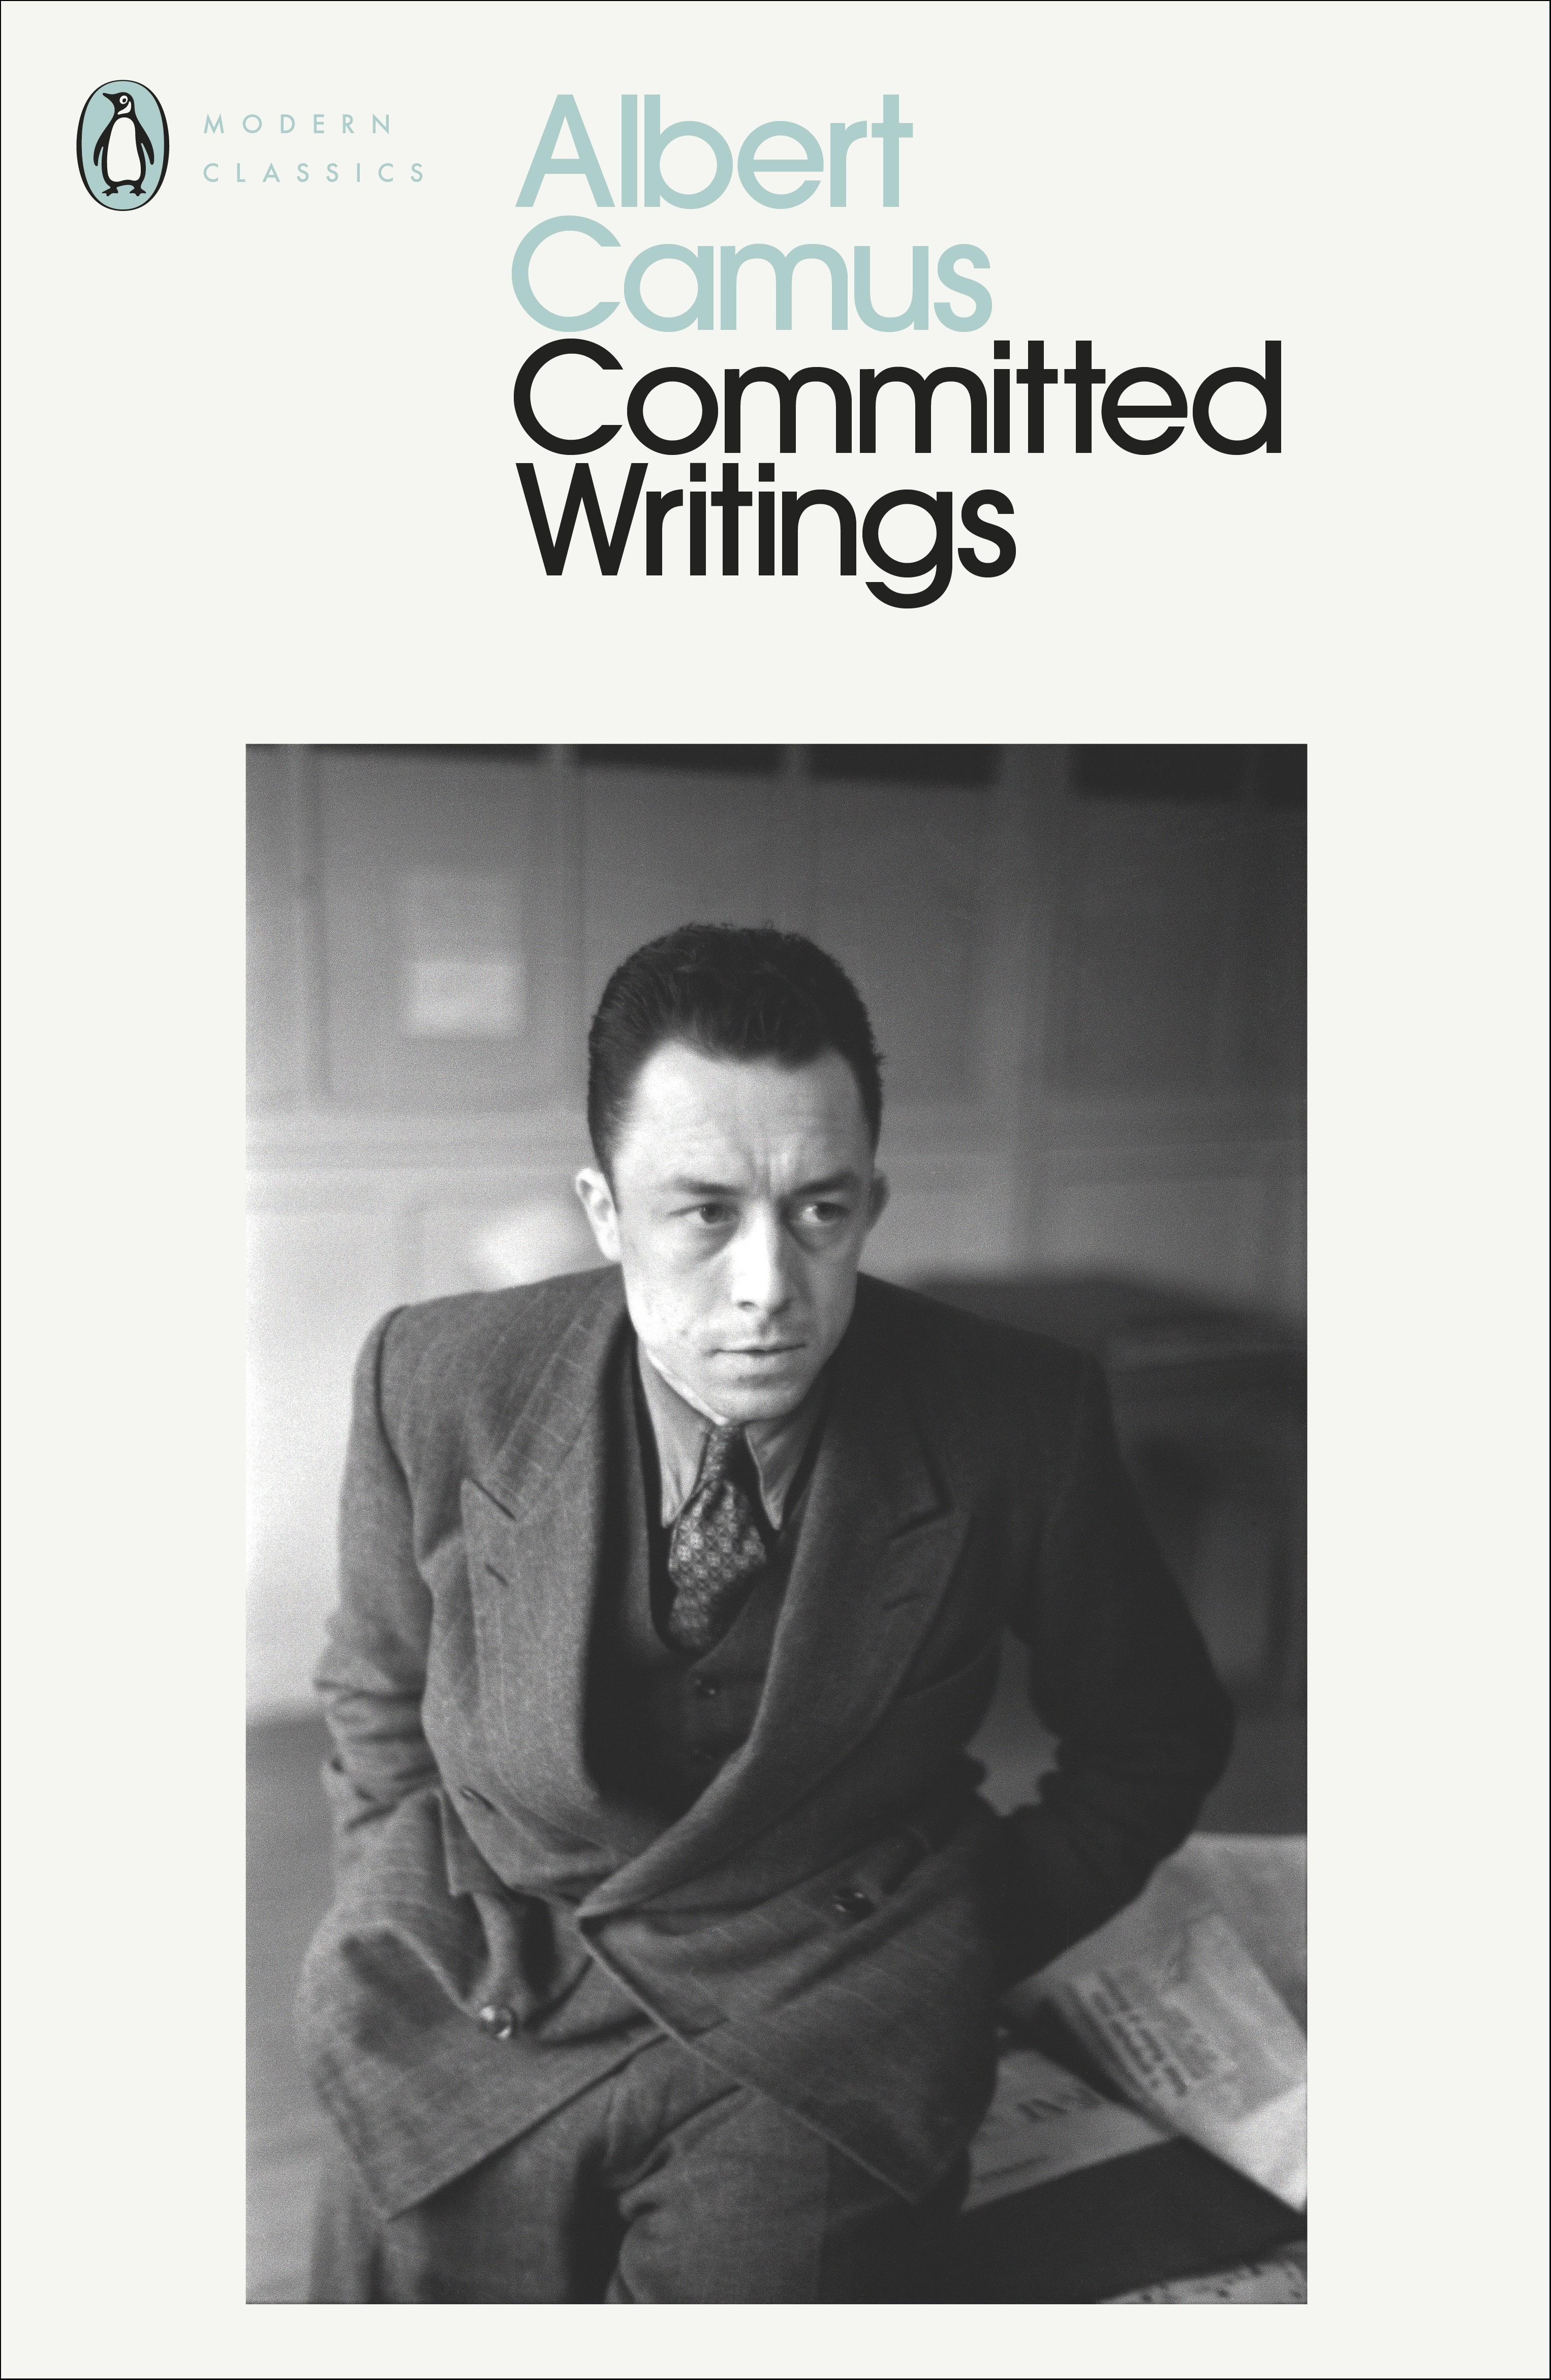 Book “Committed Writings” by Albert Camus, Alice Kaplan — August 27, 2020